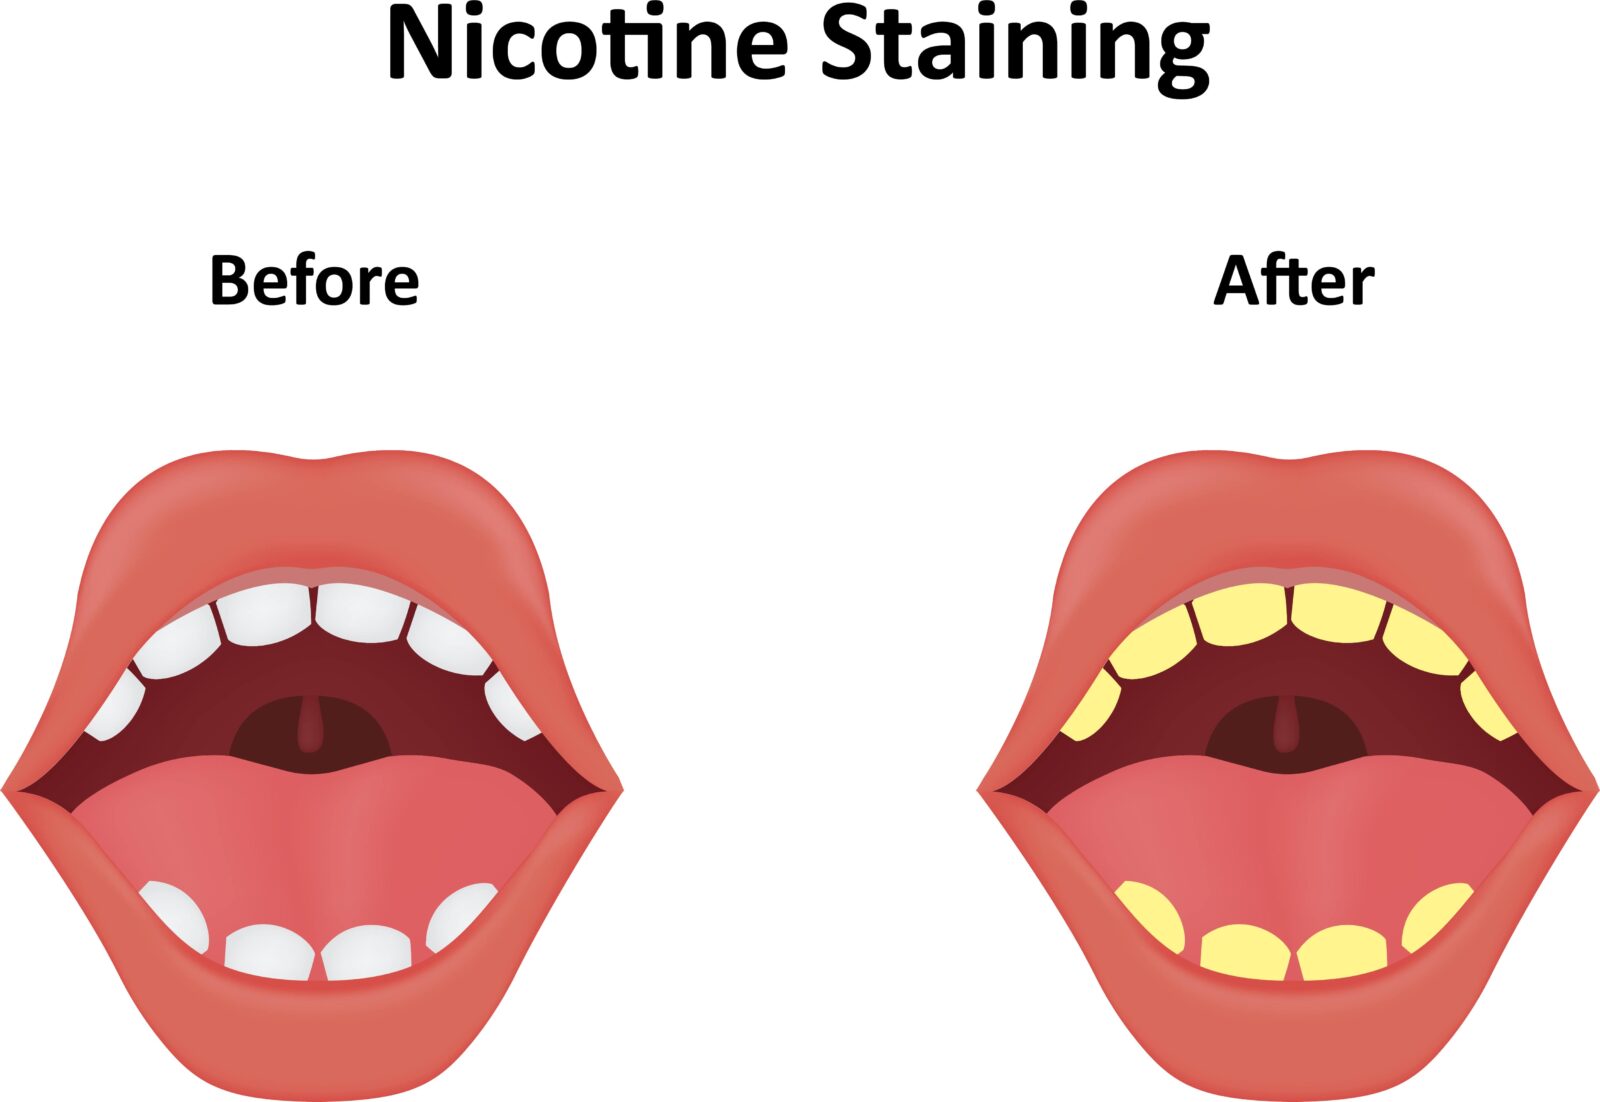 before and after nicotine staining on teeth